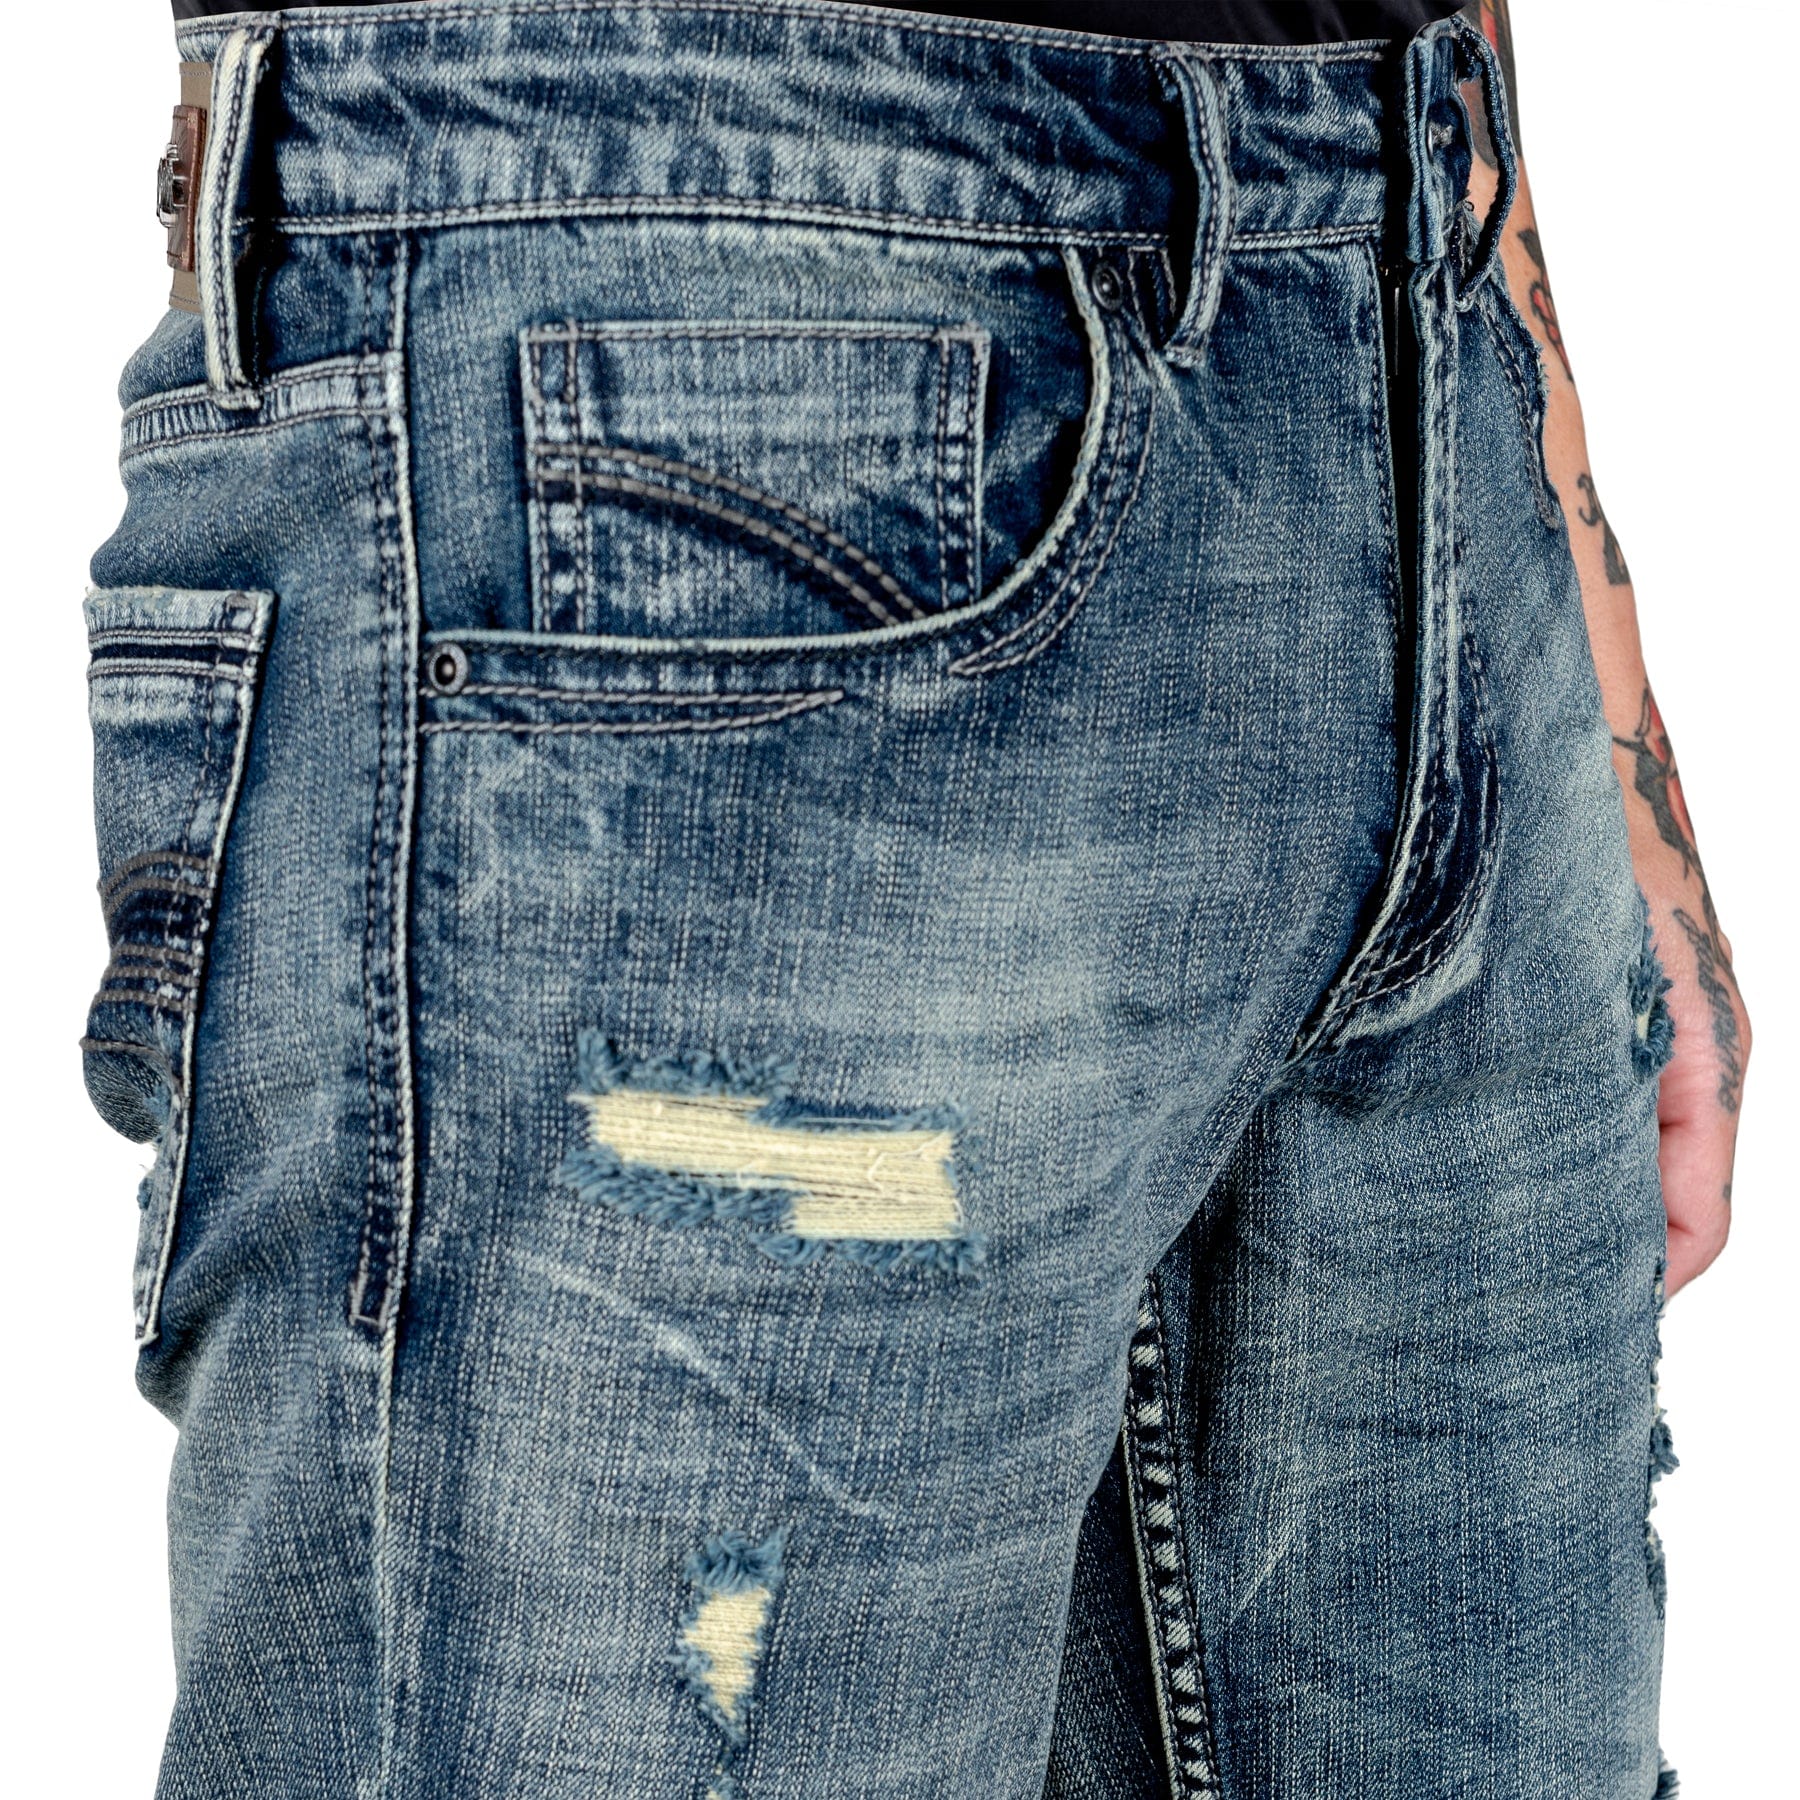 Essentials Collection Pants Trailblazer Jeans - Faded Blue